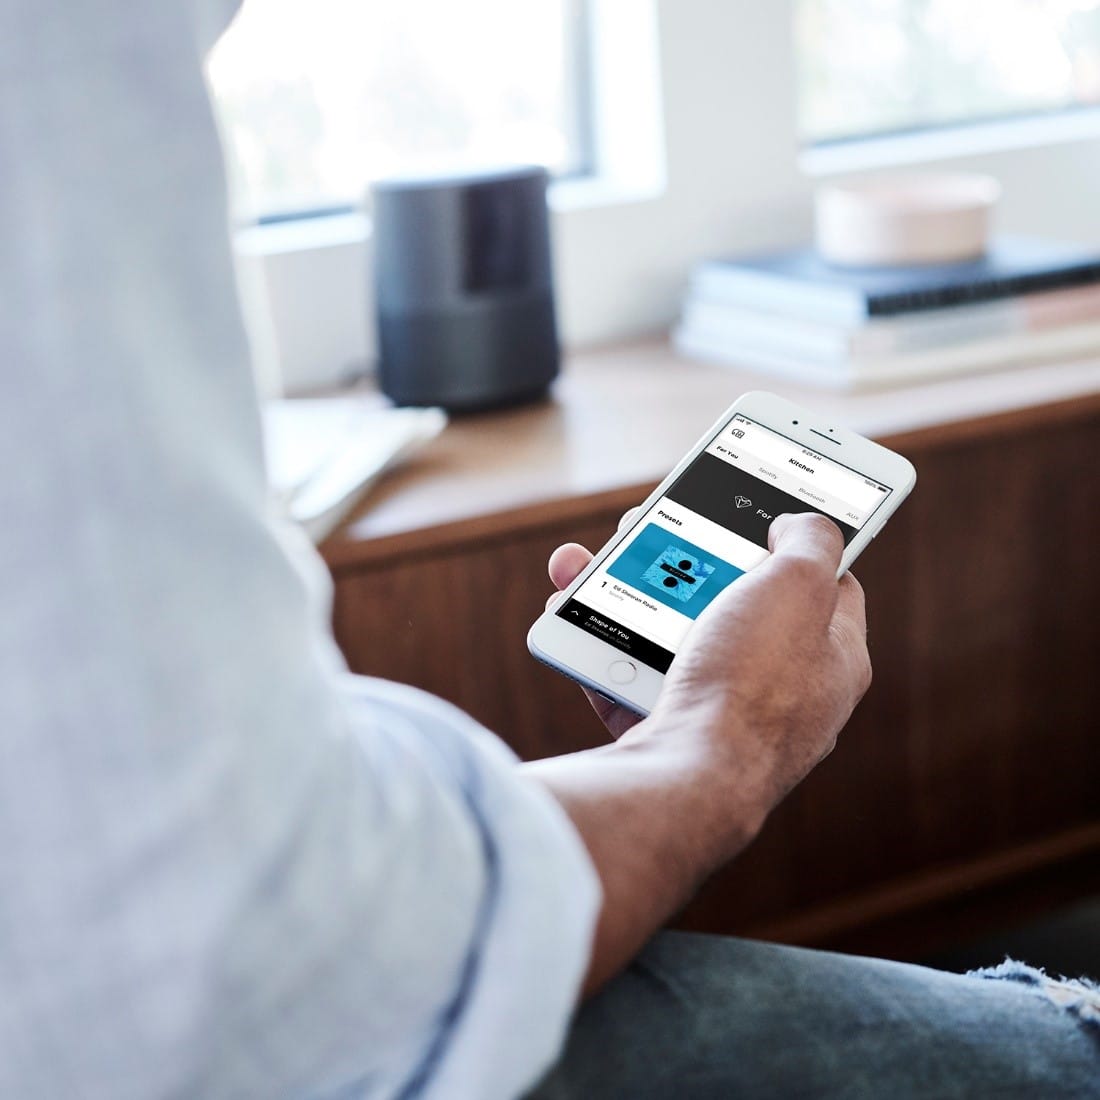 Control your speaker with Bose Music app